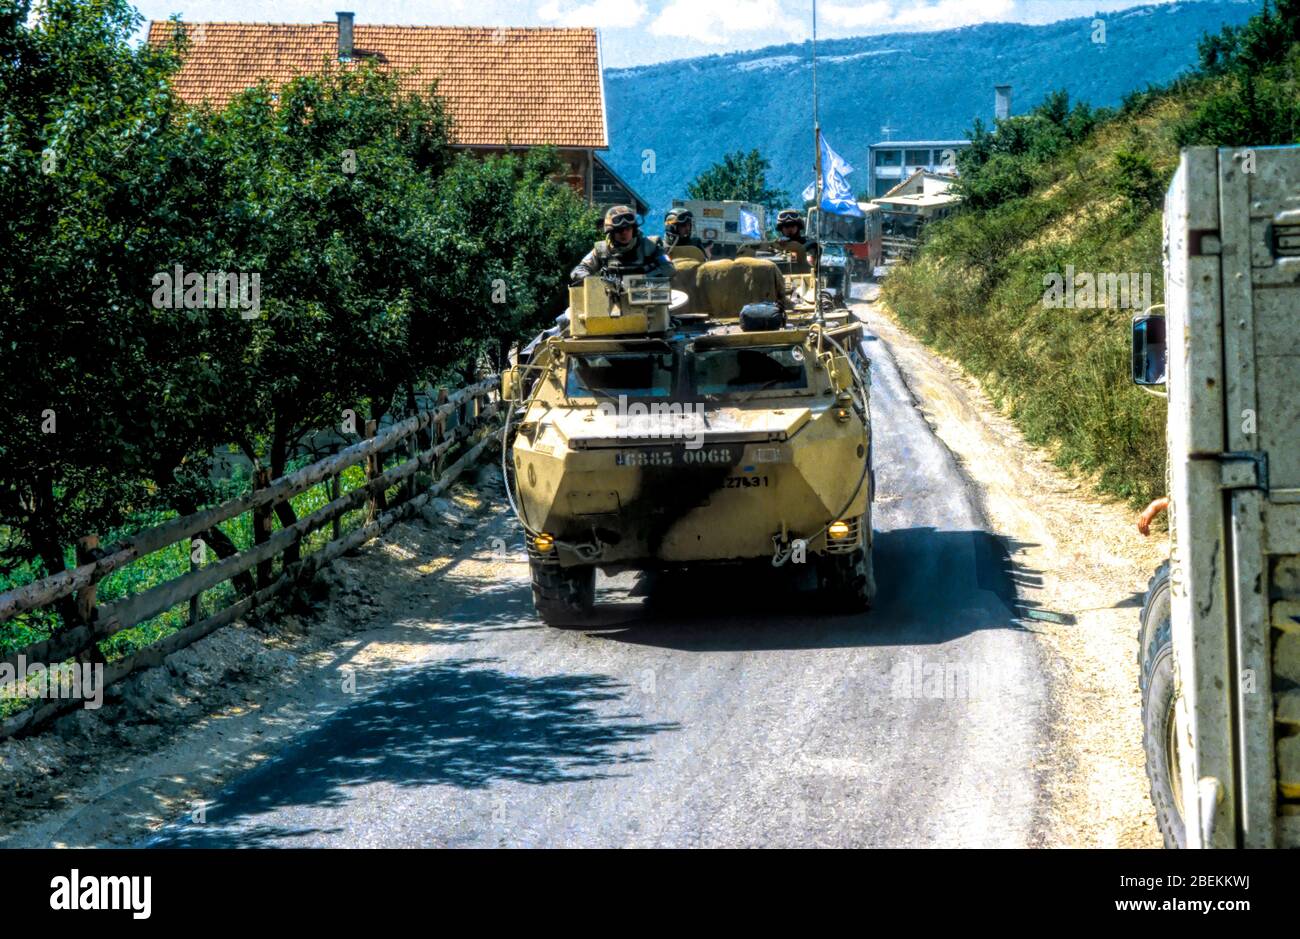 1993 Mostar, Bosnia - SFOR rapid response vehicle and soldiers patrolling the area of countryside near Mostar, Bosnia during the war Stock Photo